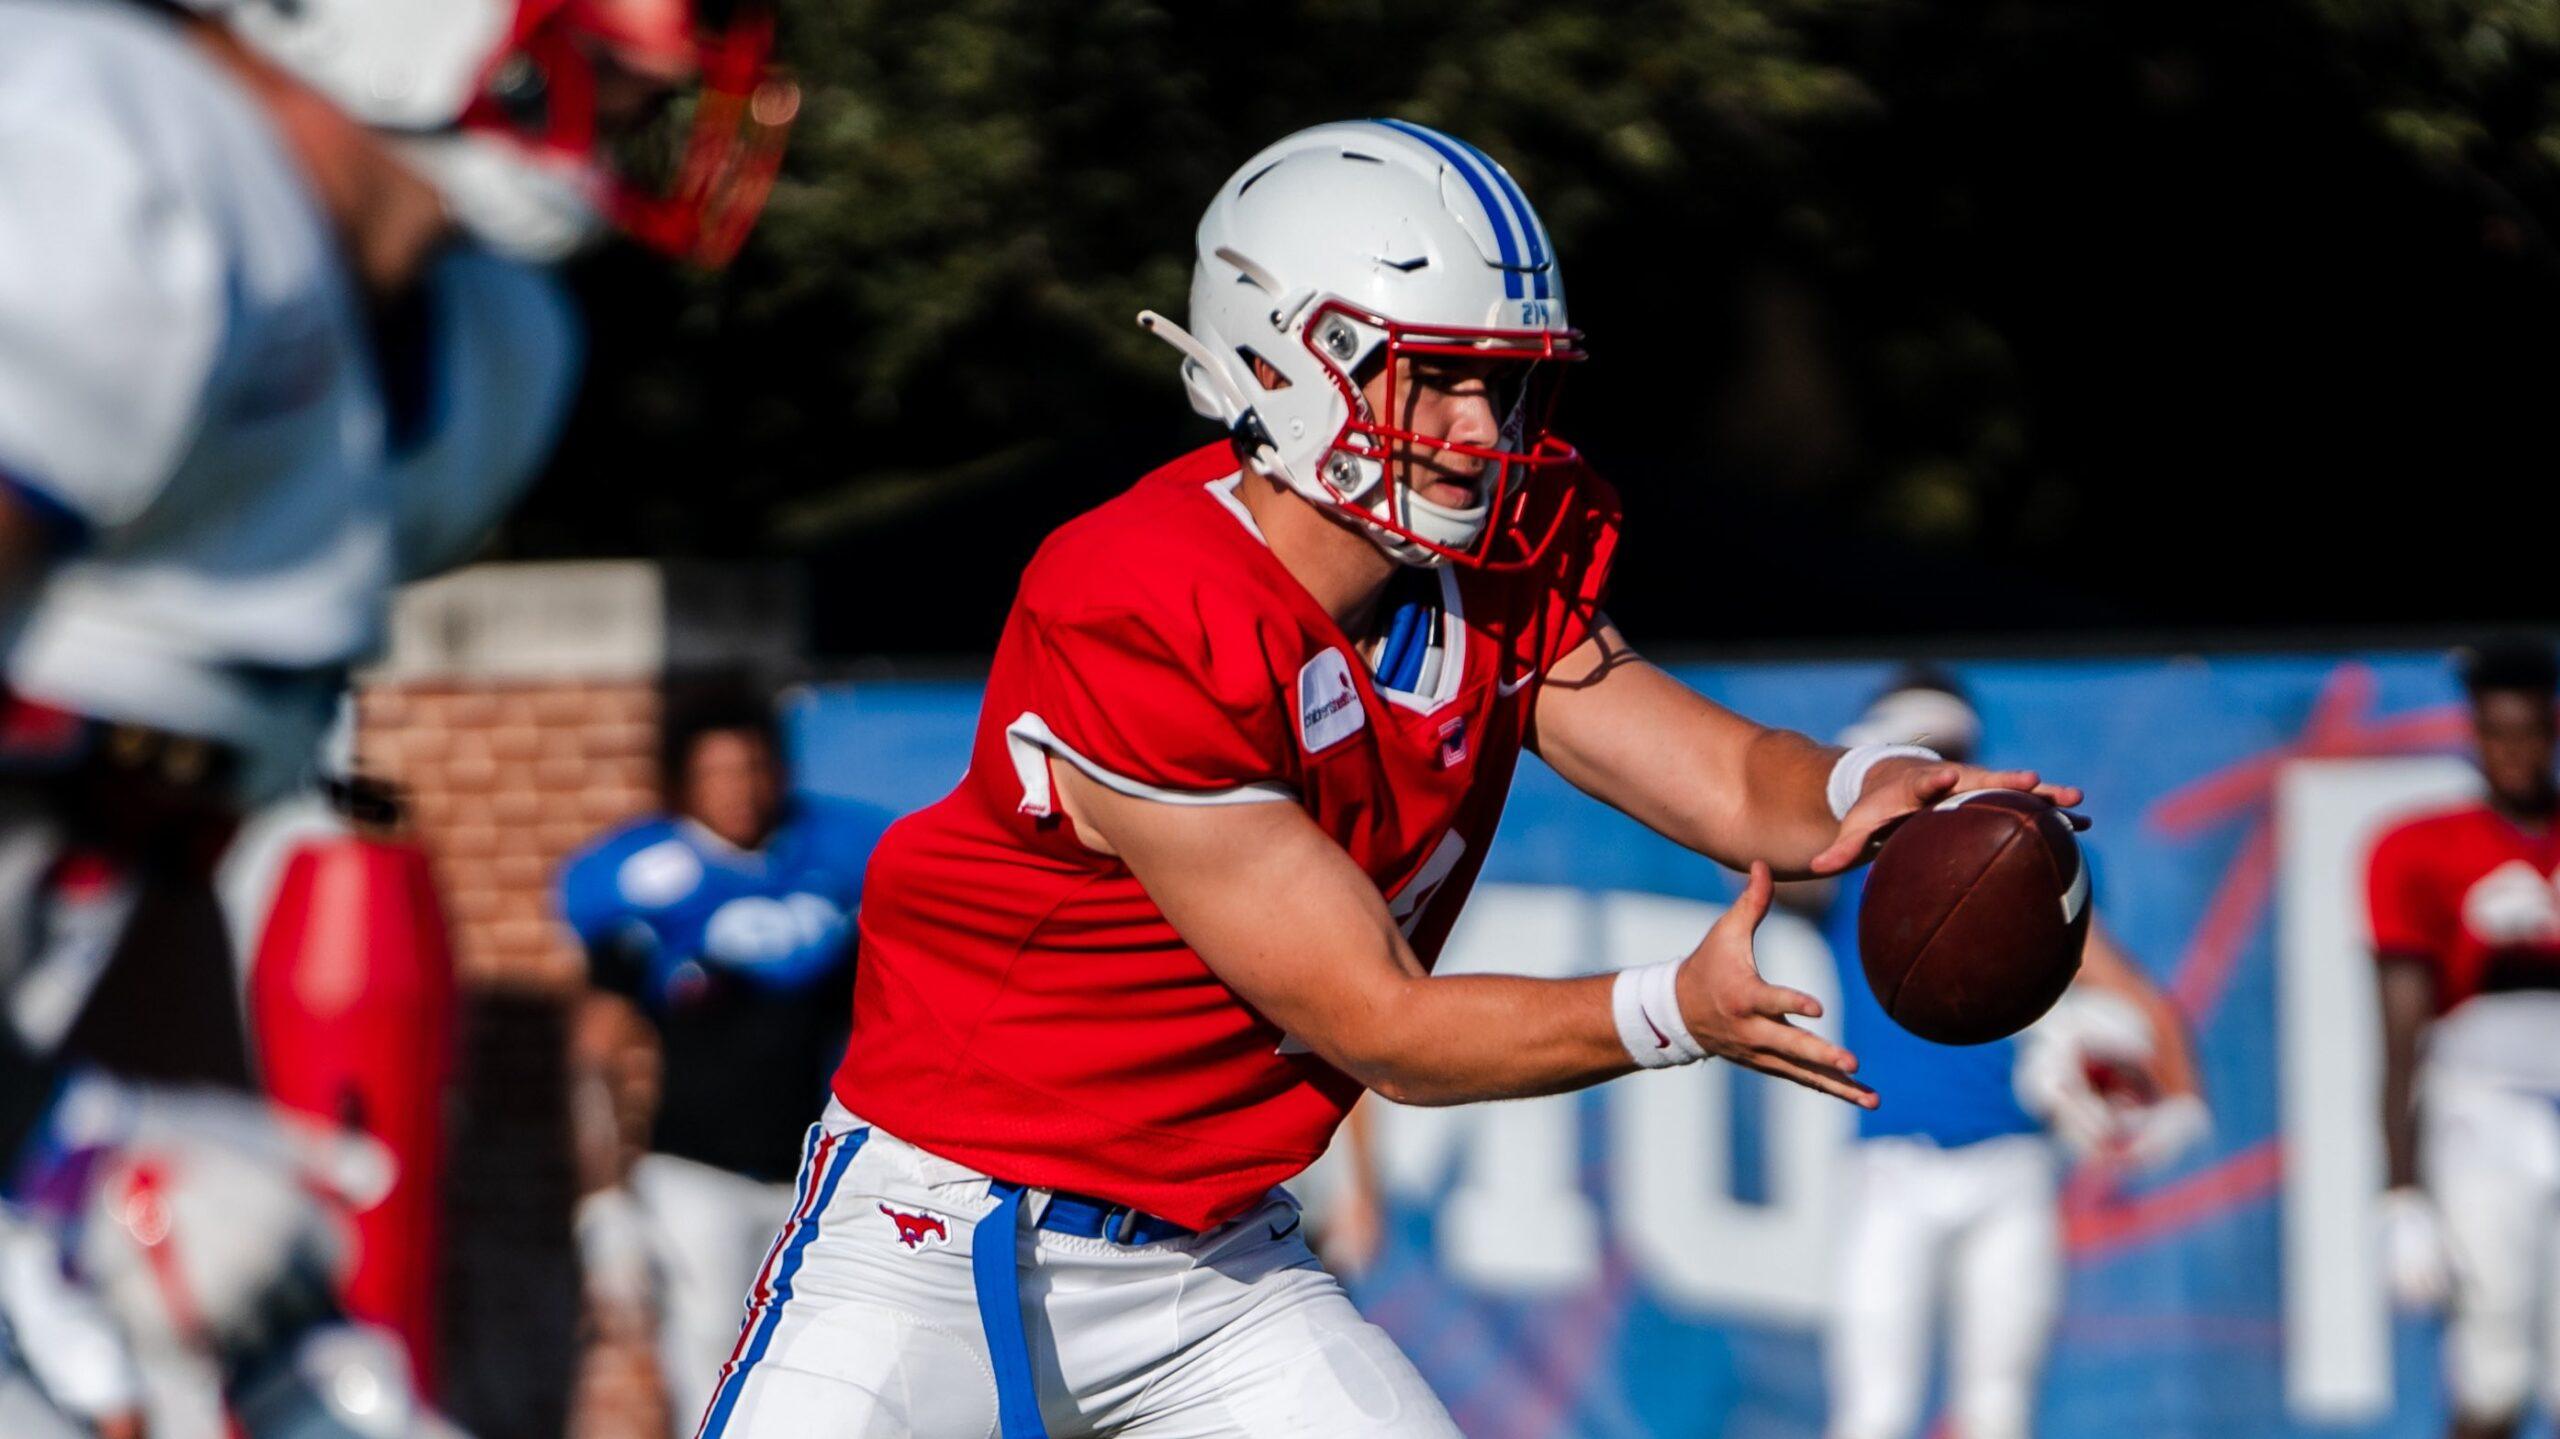 COLUMN: Even if Tanner Mordecai is the guy, SMU shouldn’t worry about old-school redshirt traditions with Preston Stone